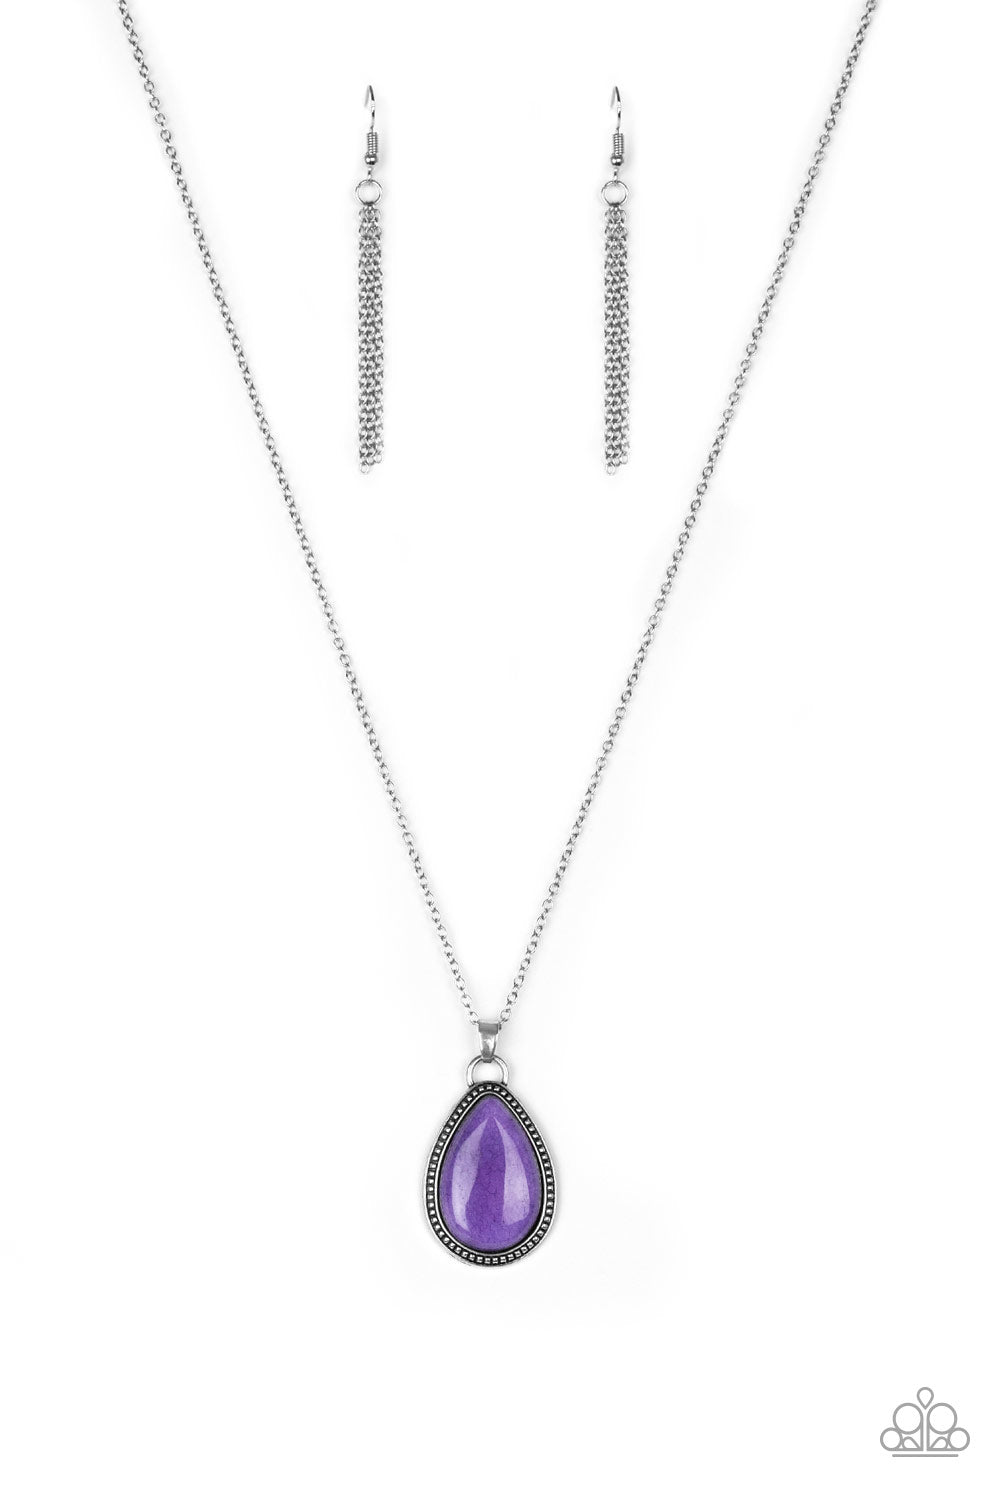 On The Home FRONTIER - Paparazzi - Purple Stone Teardrop Necklace